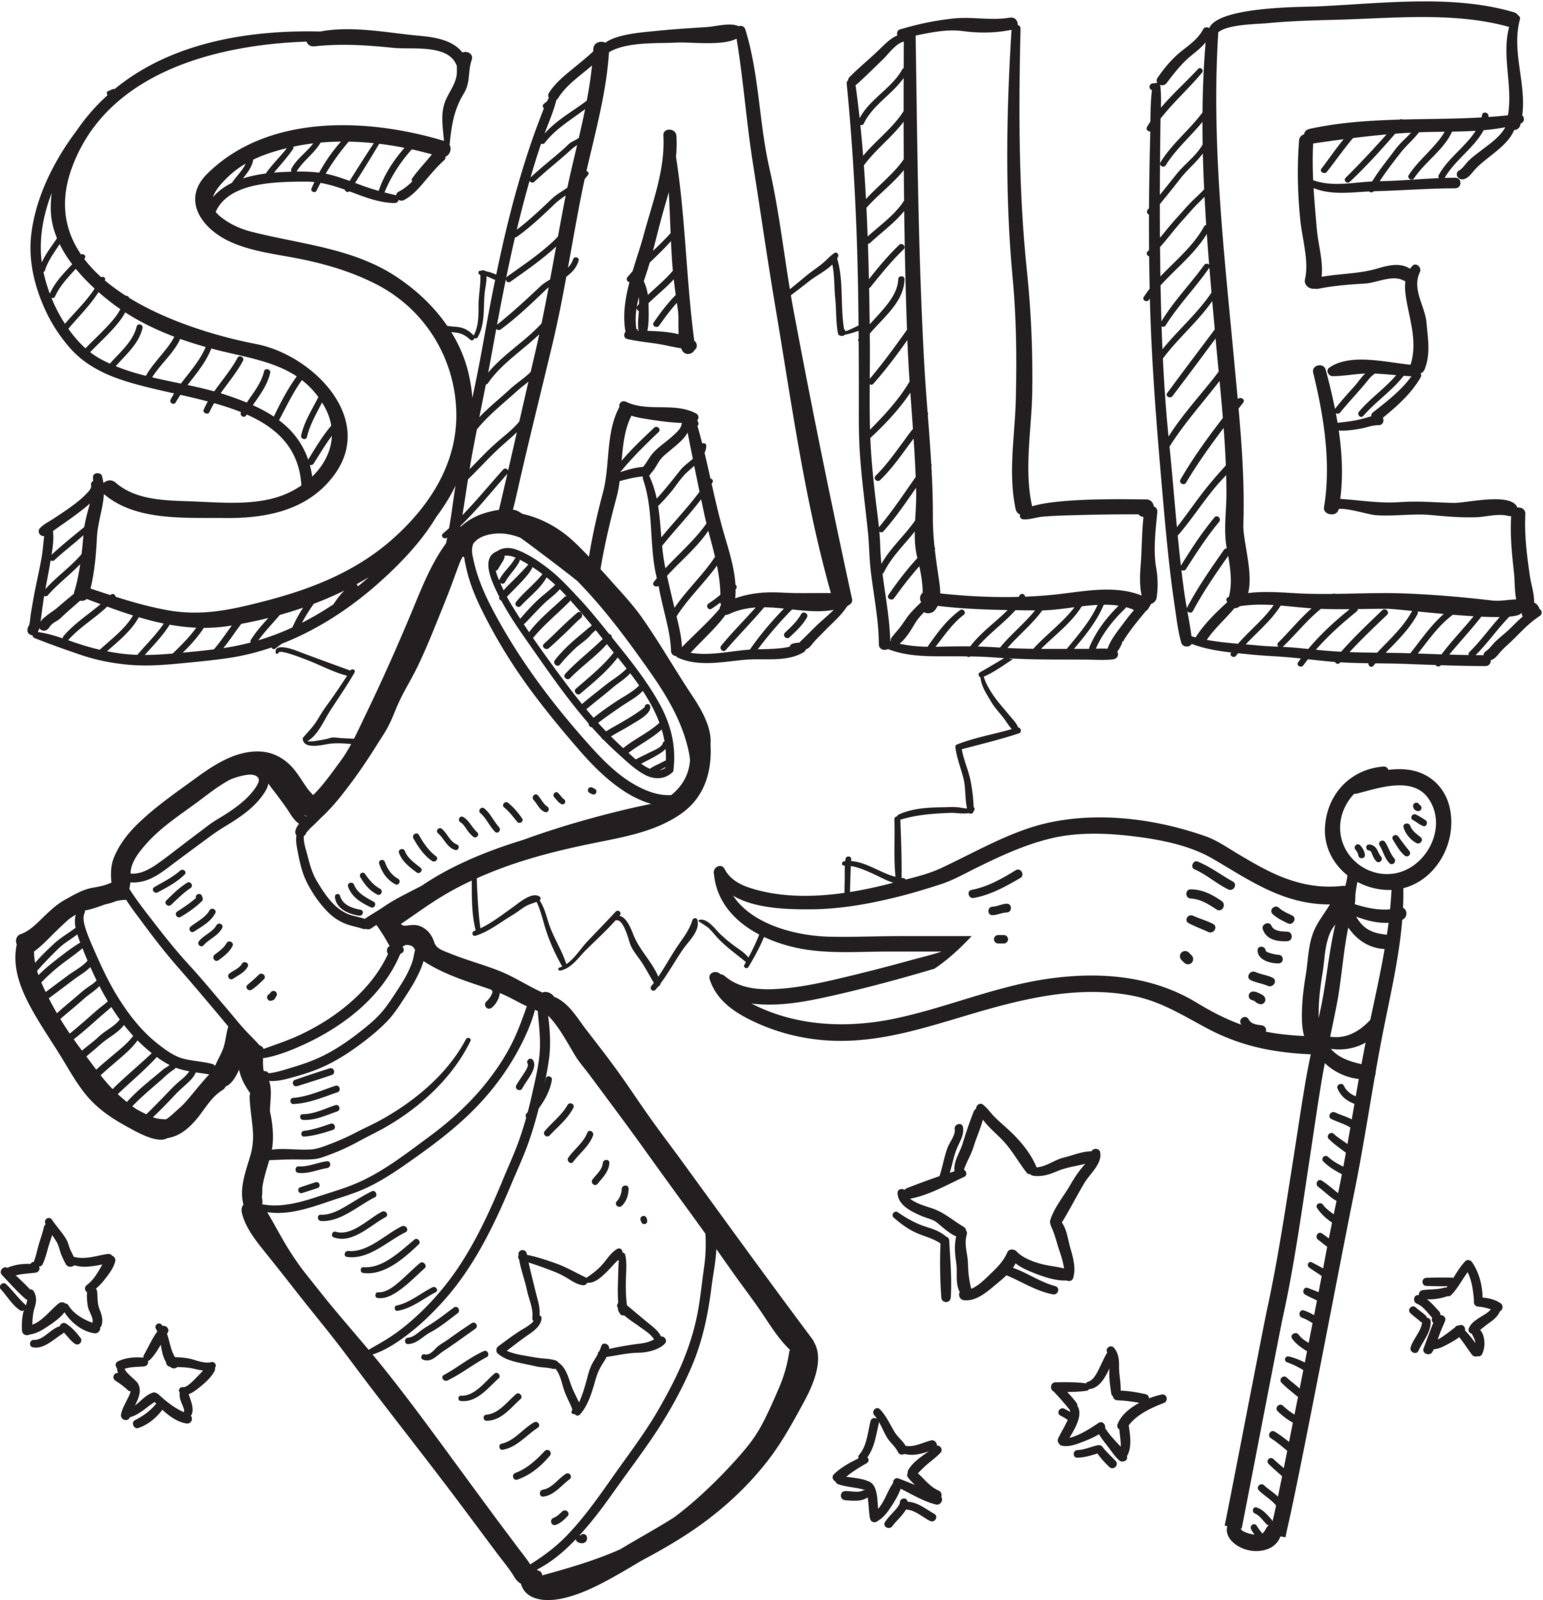 Doodle style retail sale announcement icon in vector format. Sketch includes text, air horn, and flag.